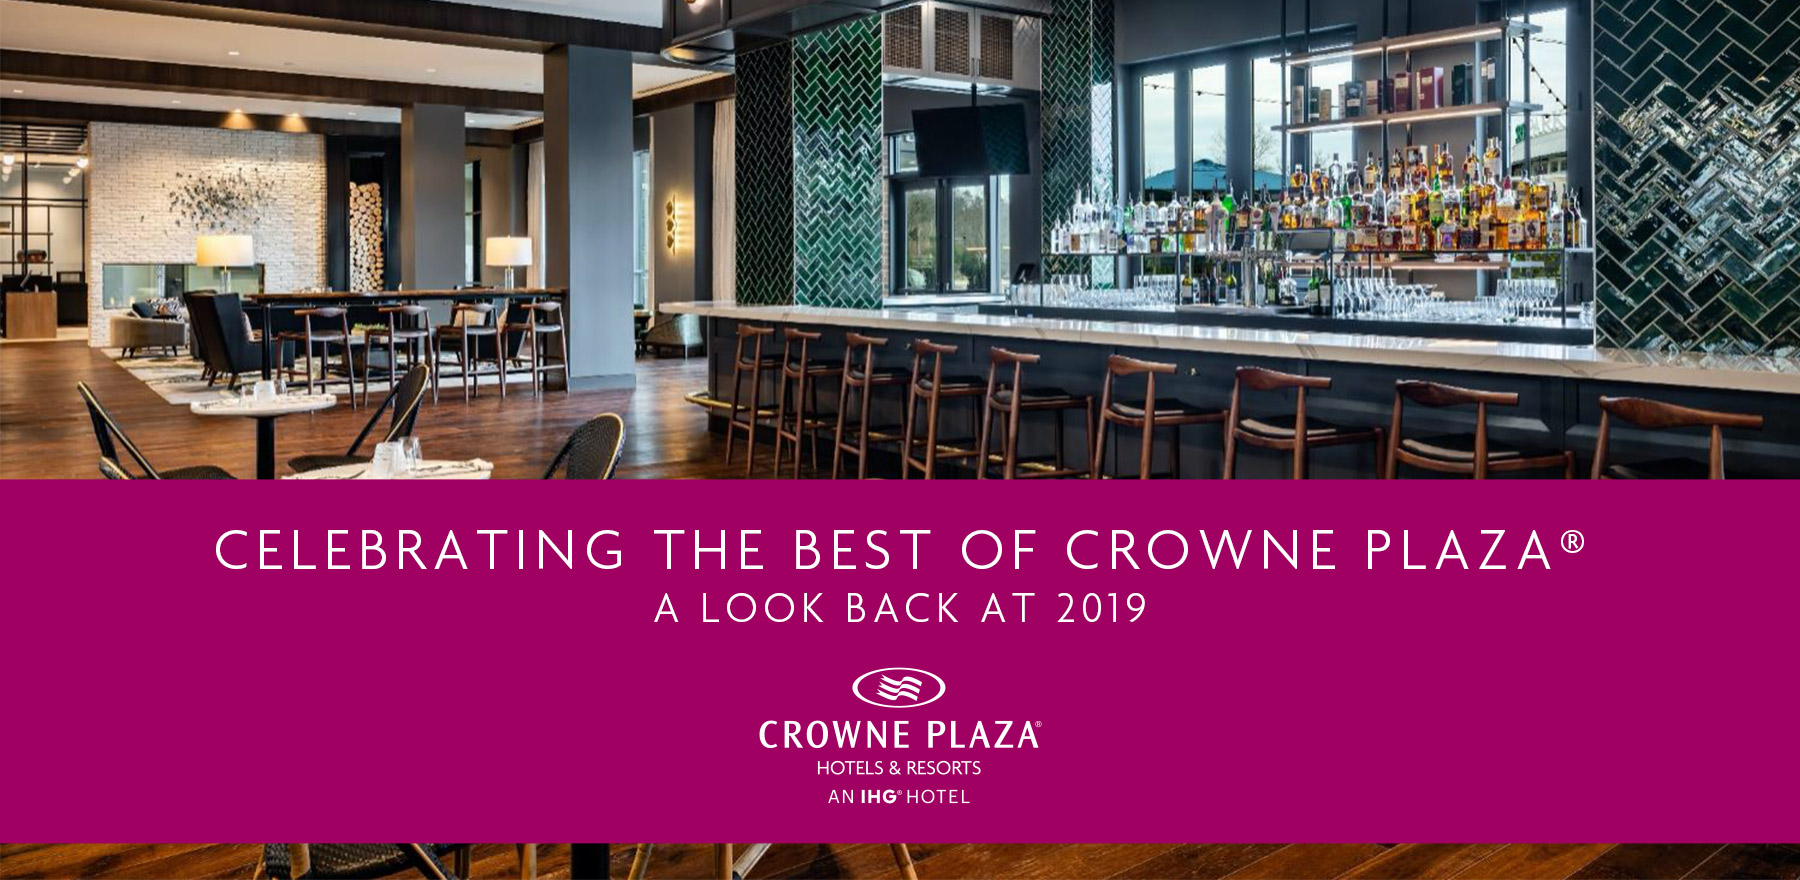 Crowne Plaza | Celebrating the best of Crowne Plaza | A Look Back At 2019.